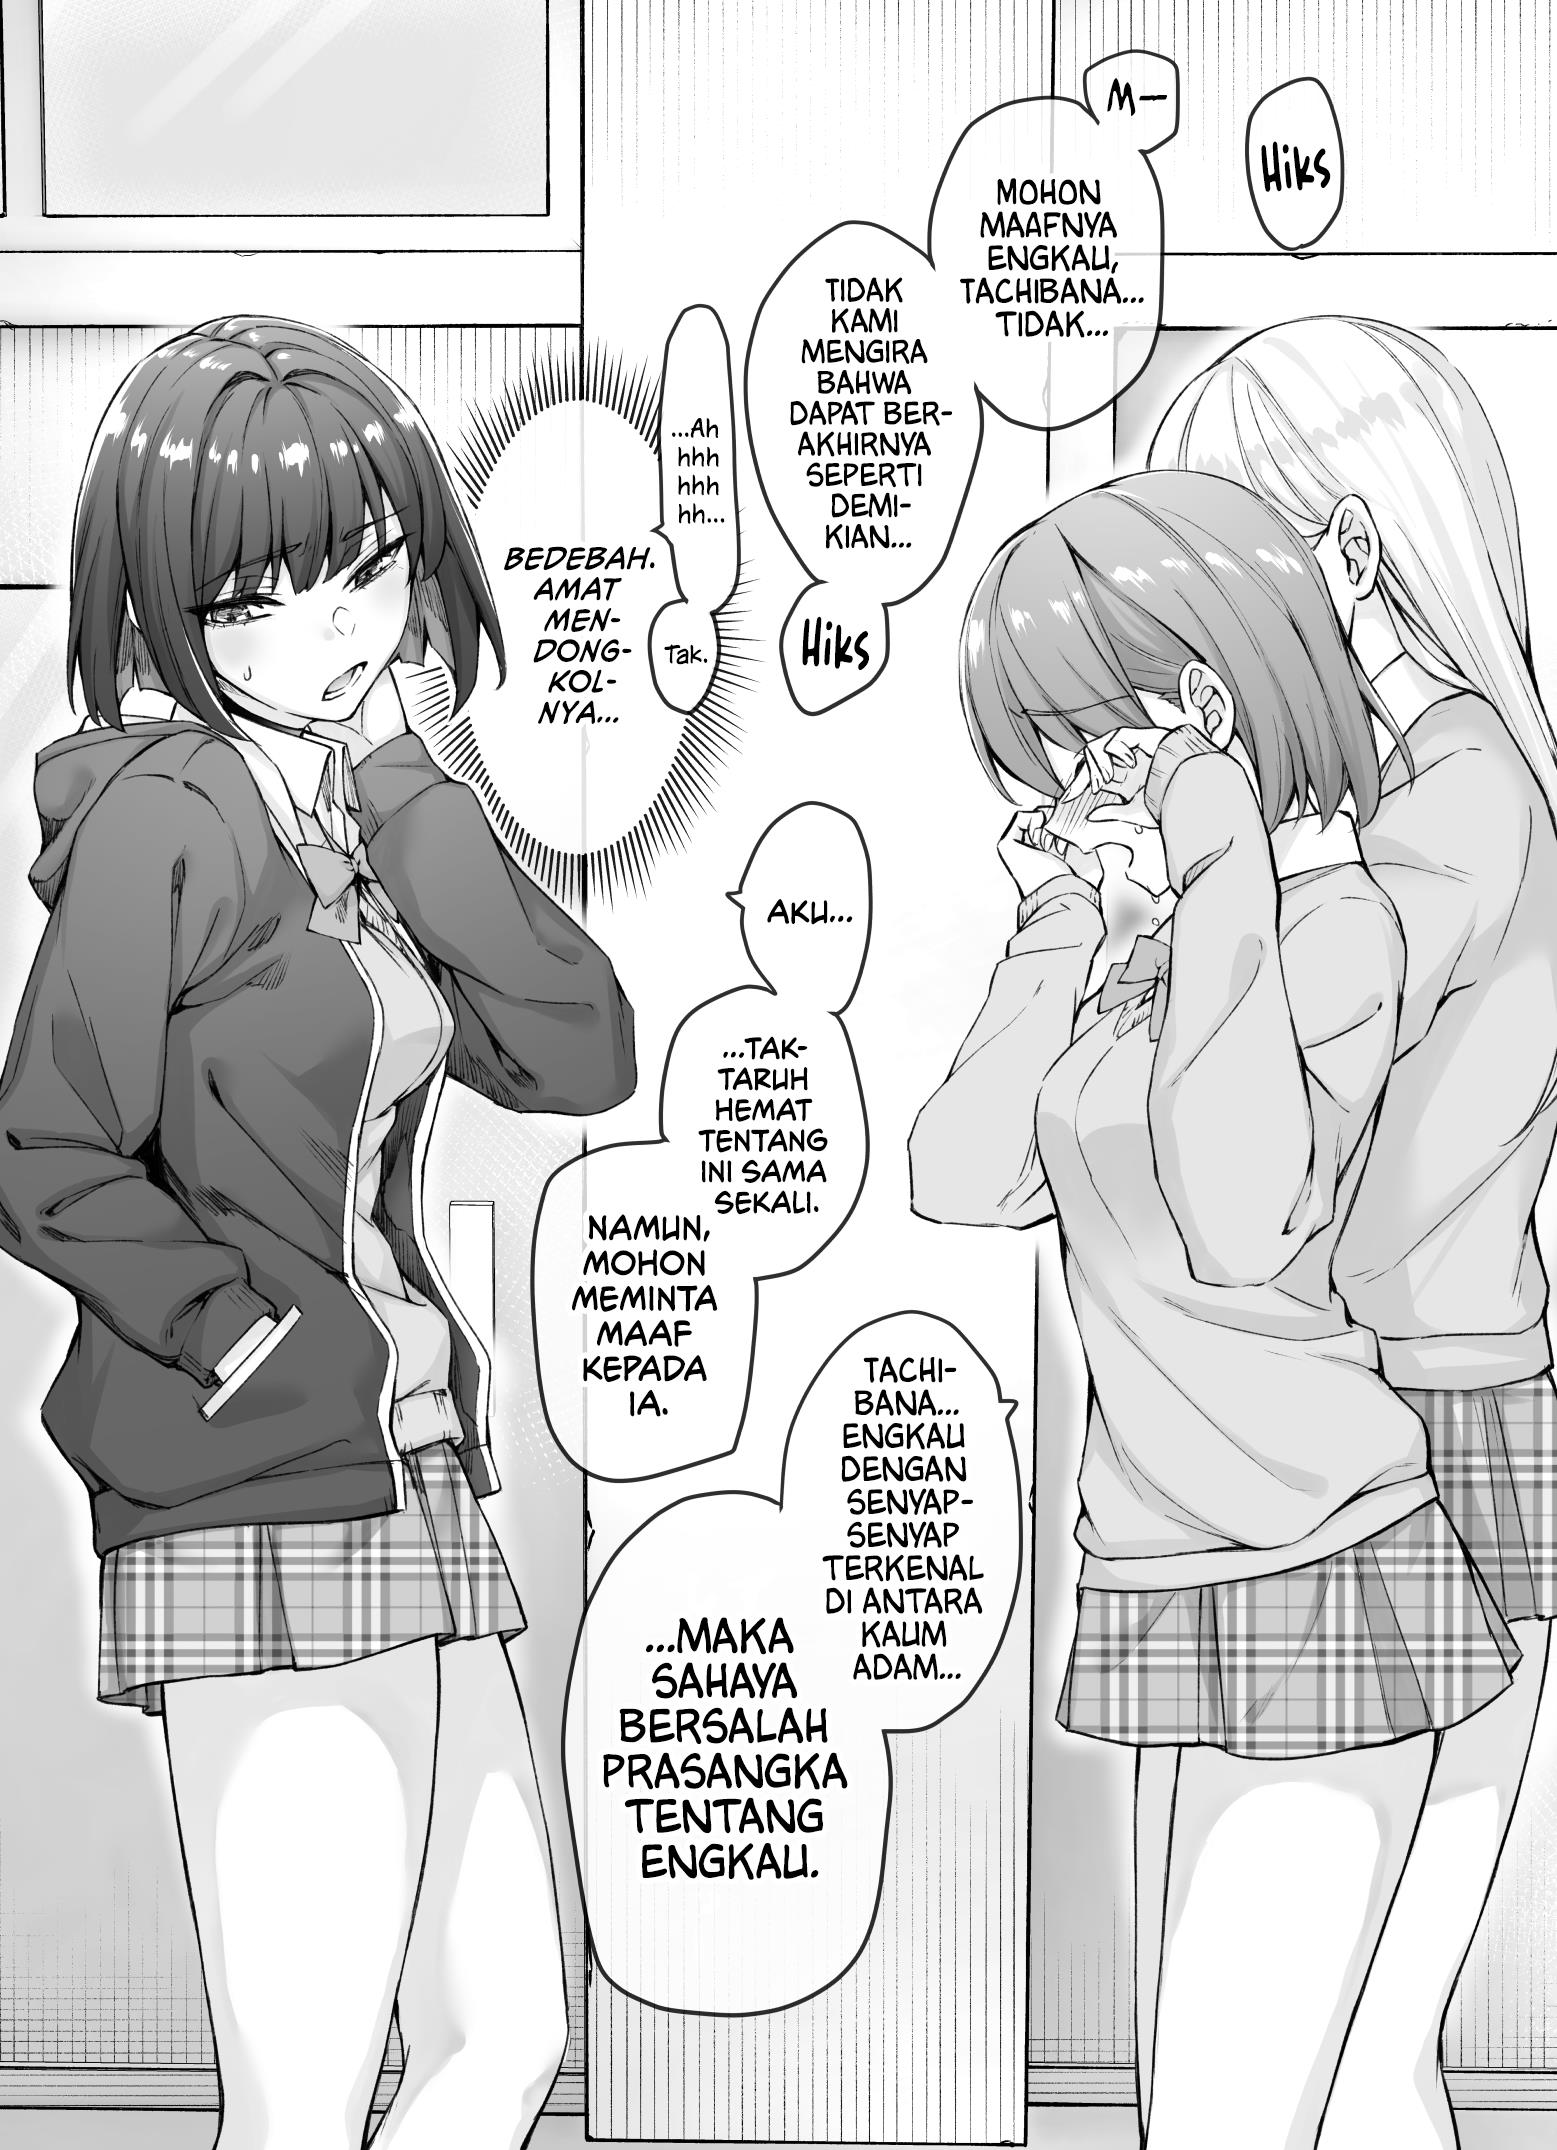 The Tsuntsuntsuntsuntsuntsun tsuntsuntsuntsuntsundere Girl Getting Less and Less Tsun Day by Day Chapter 13.1